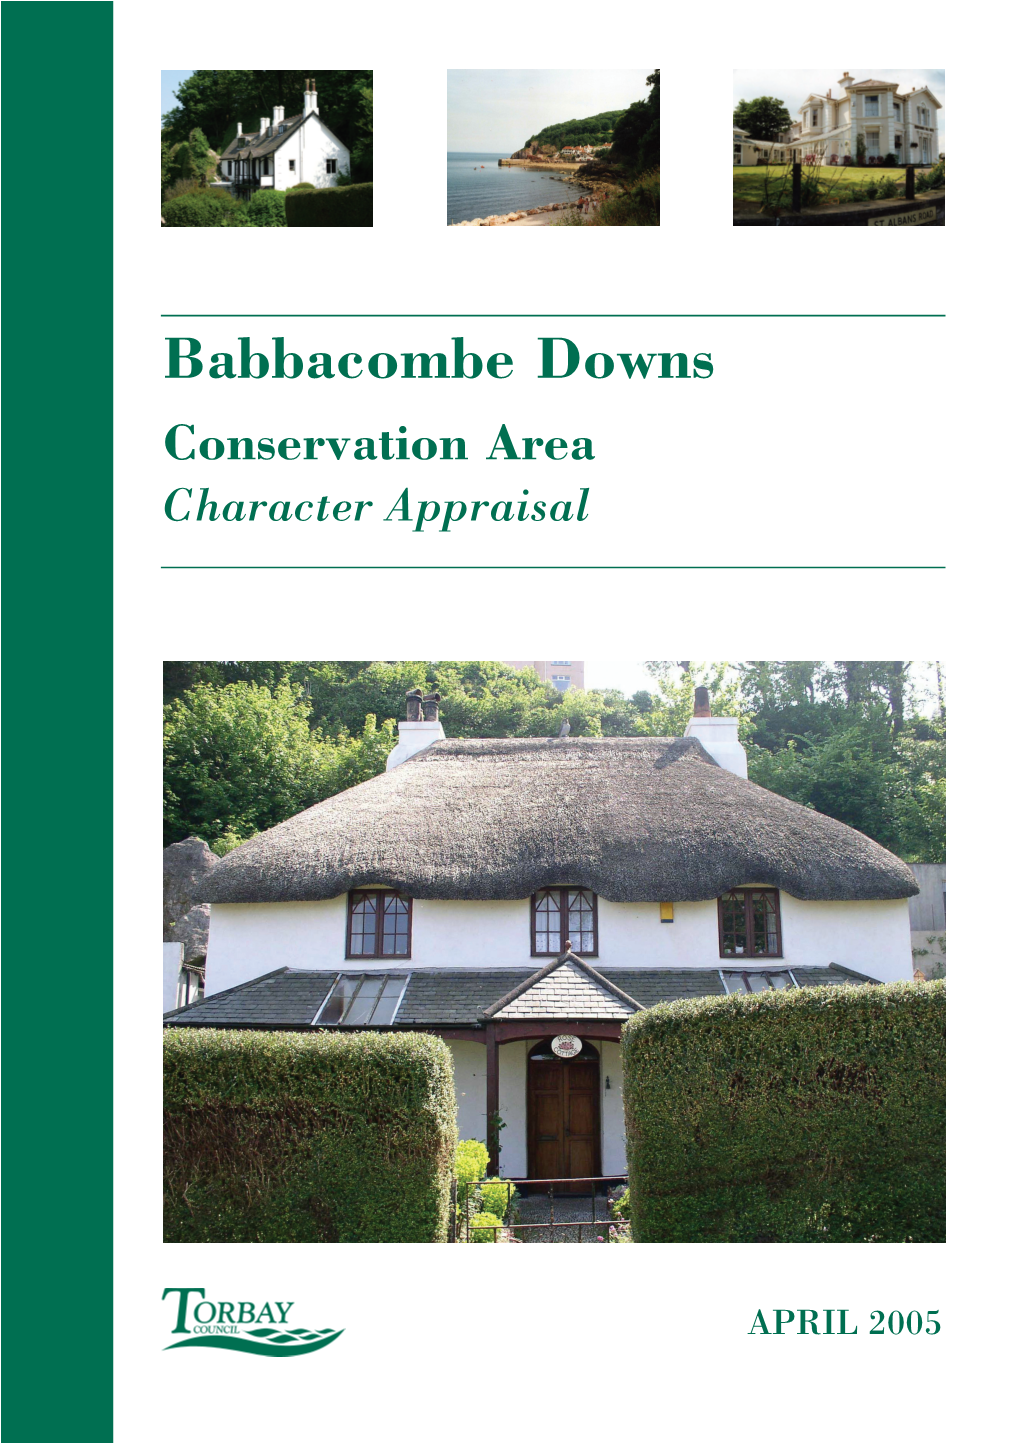 Babbacombe Downs Conservation Area Character Appraisal